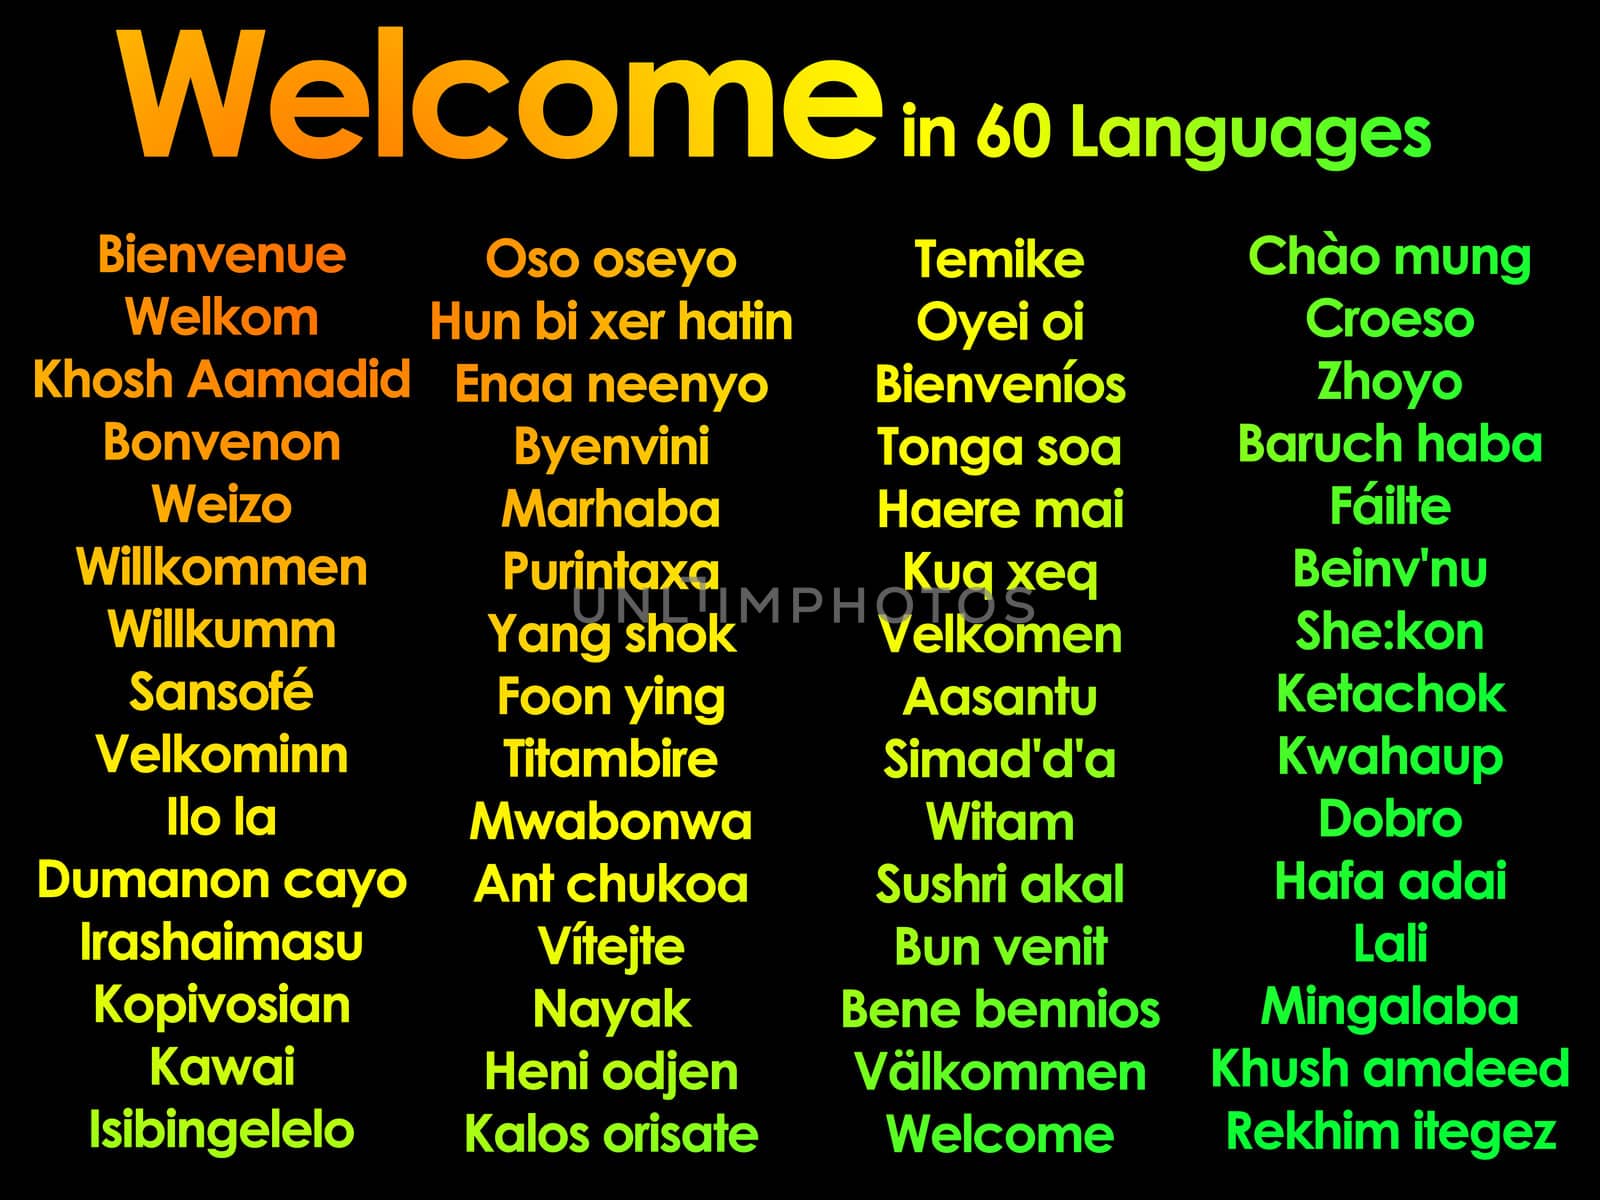 Welcome marhaba wilcommen written in lots of 60 different langua by bobbigmac